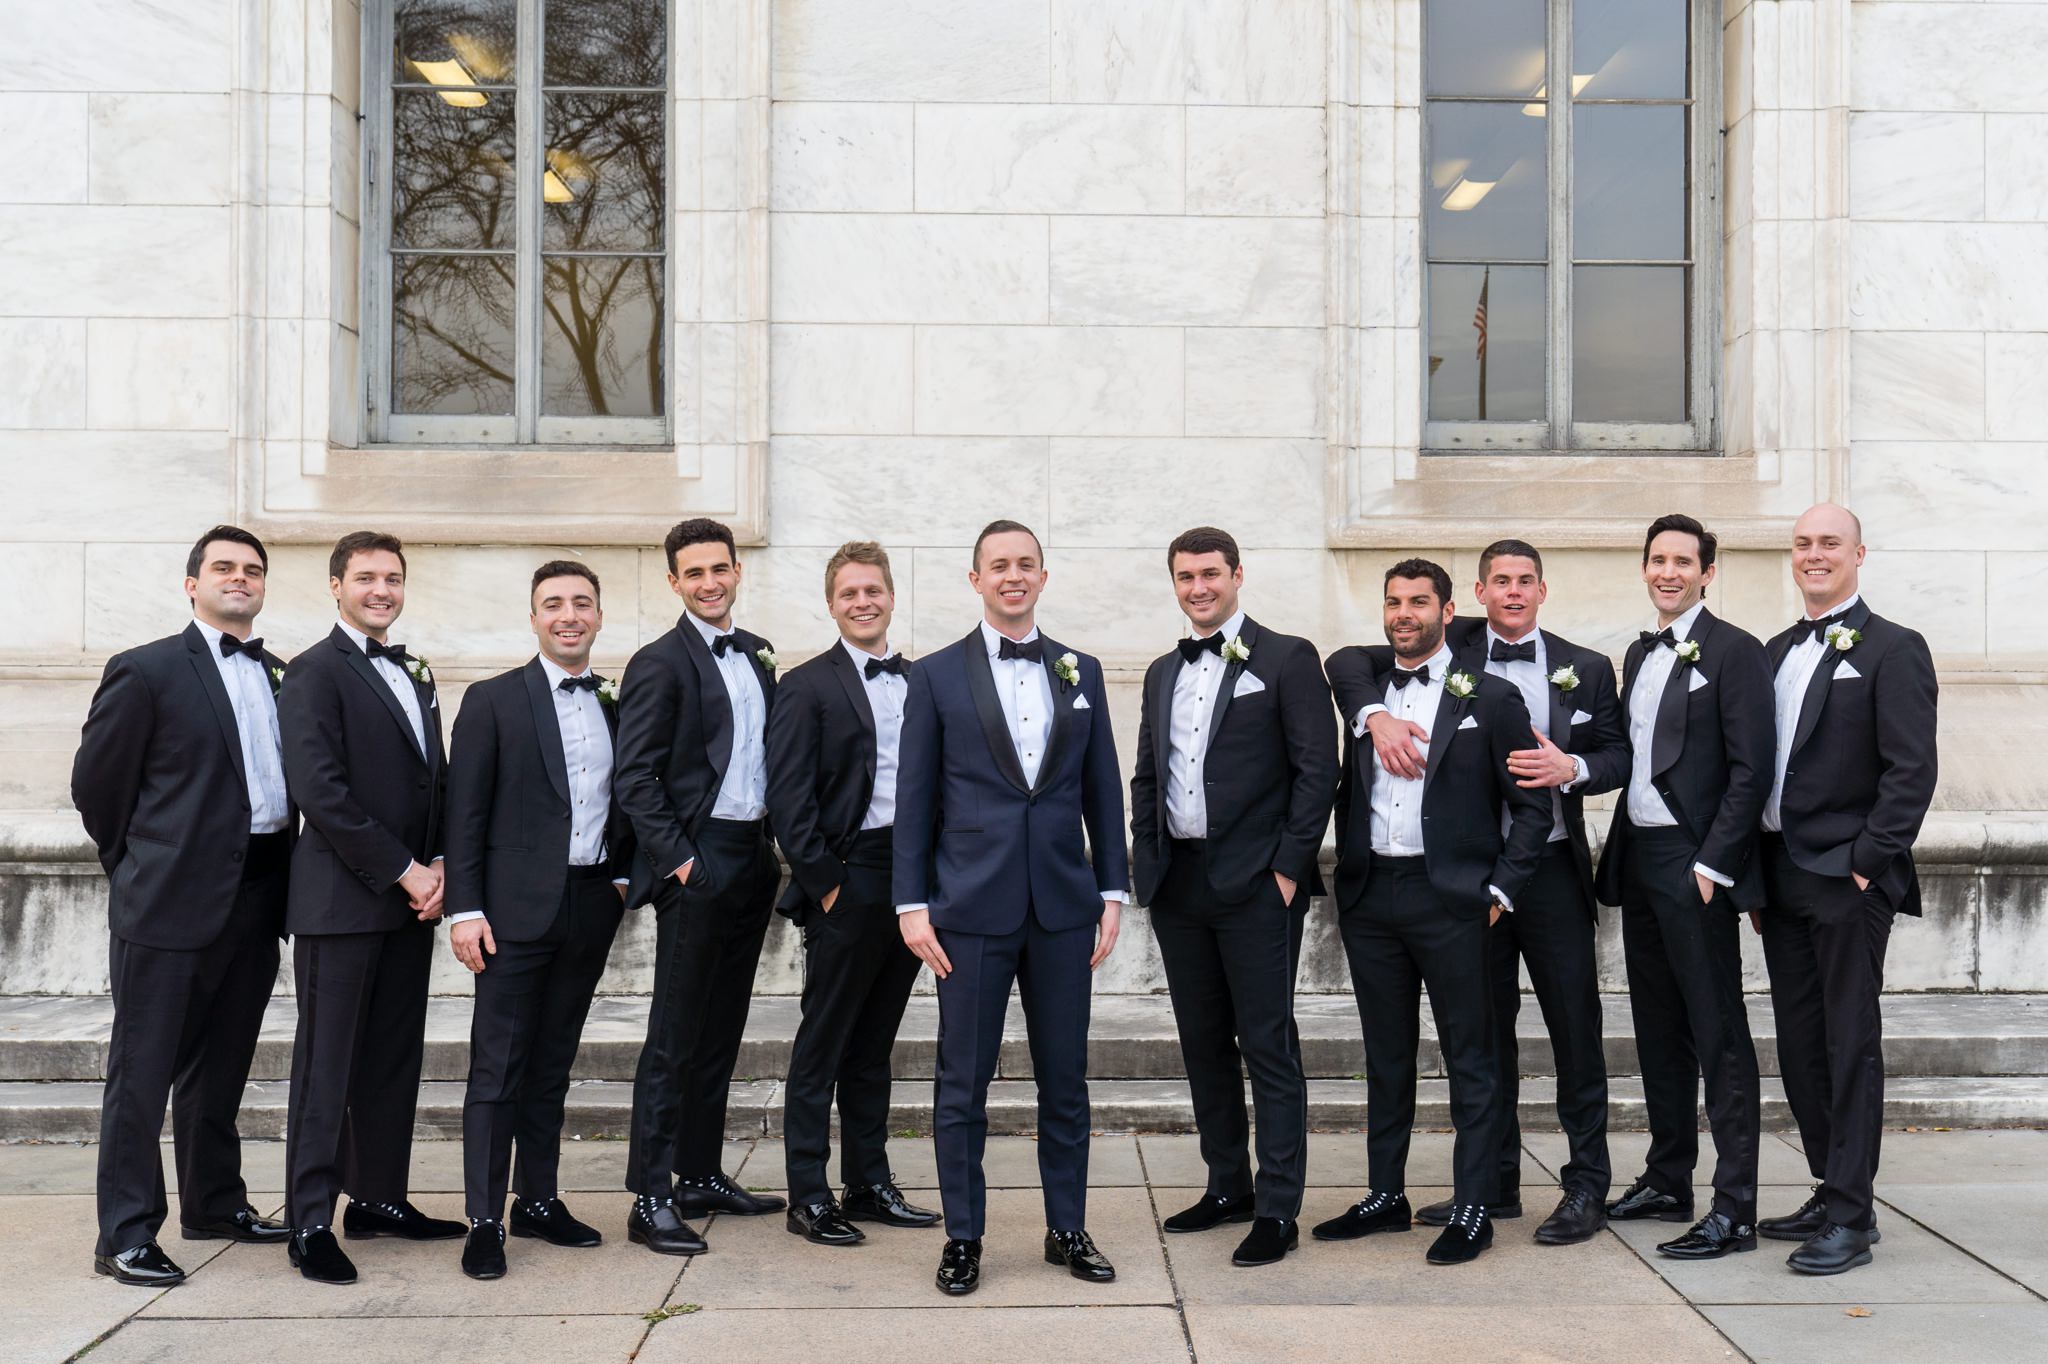 Groomsmen at the Detroit Public Library